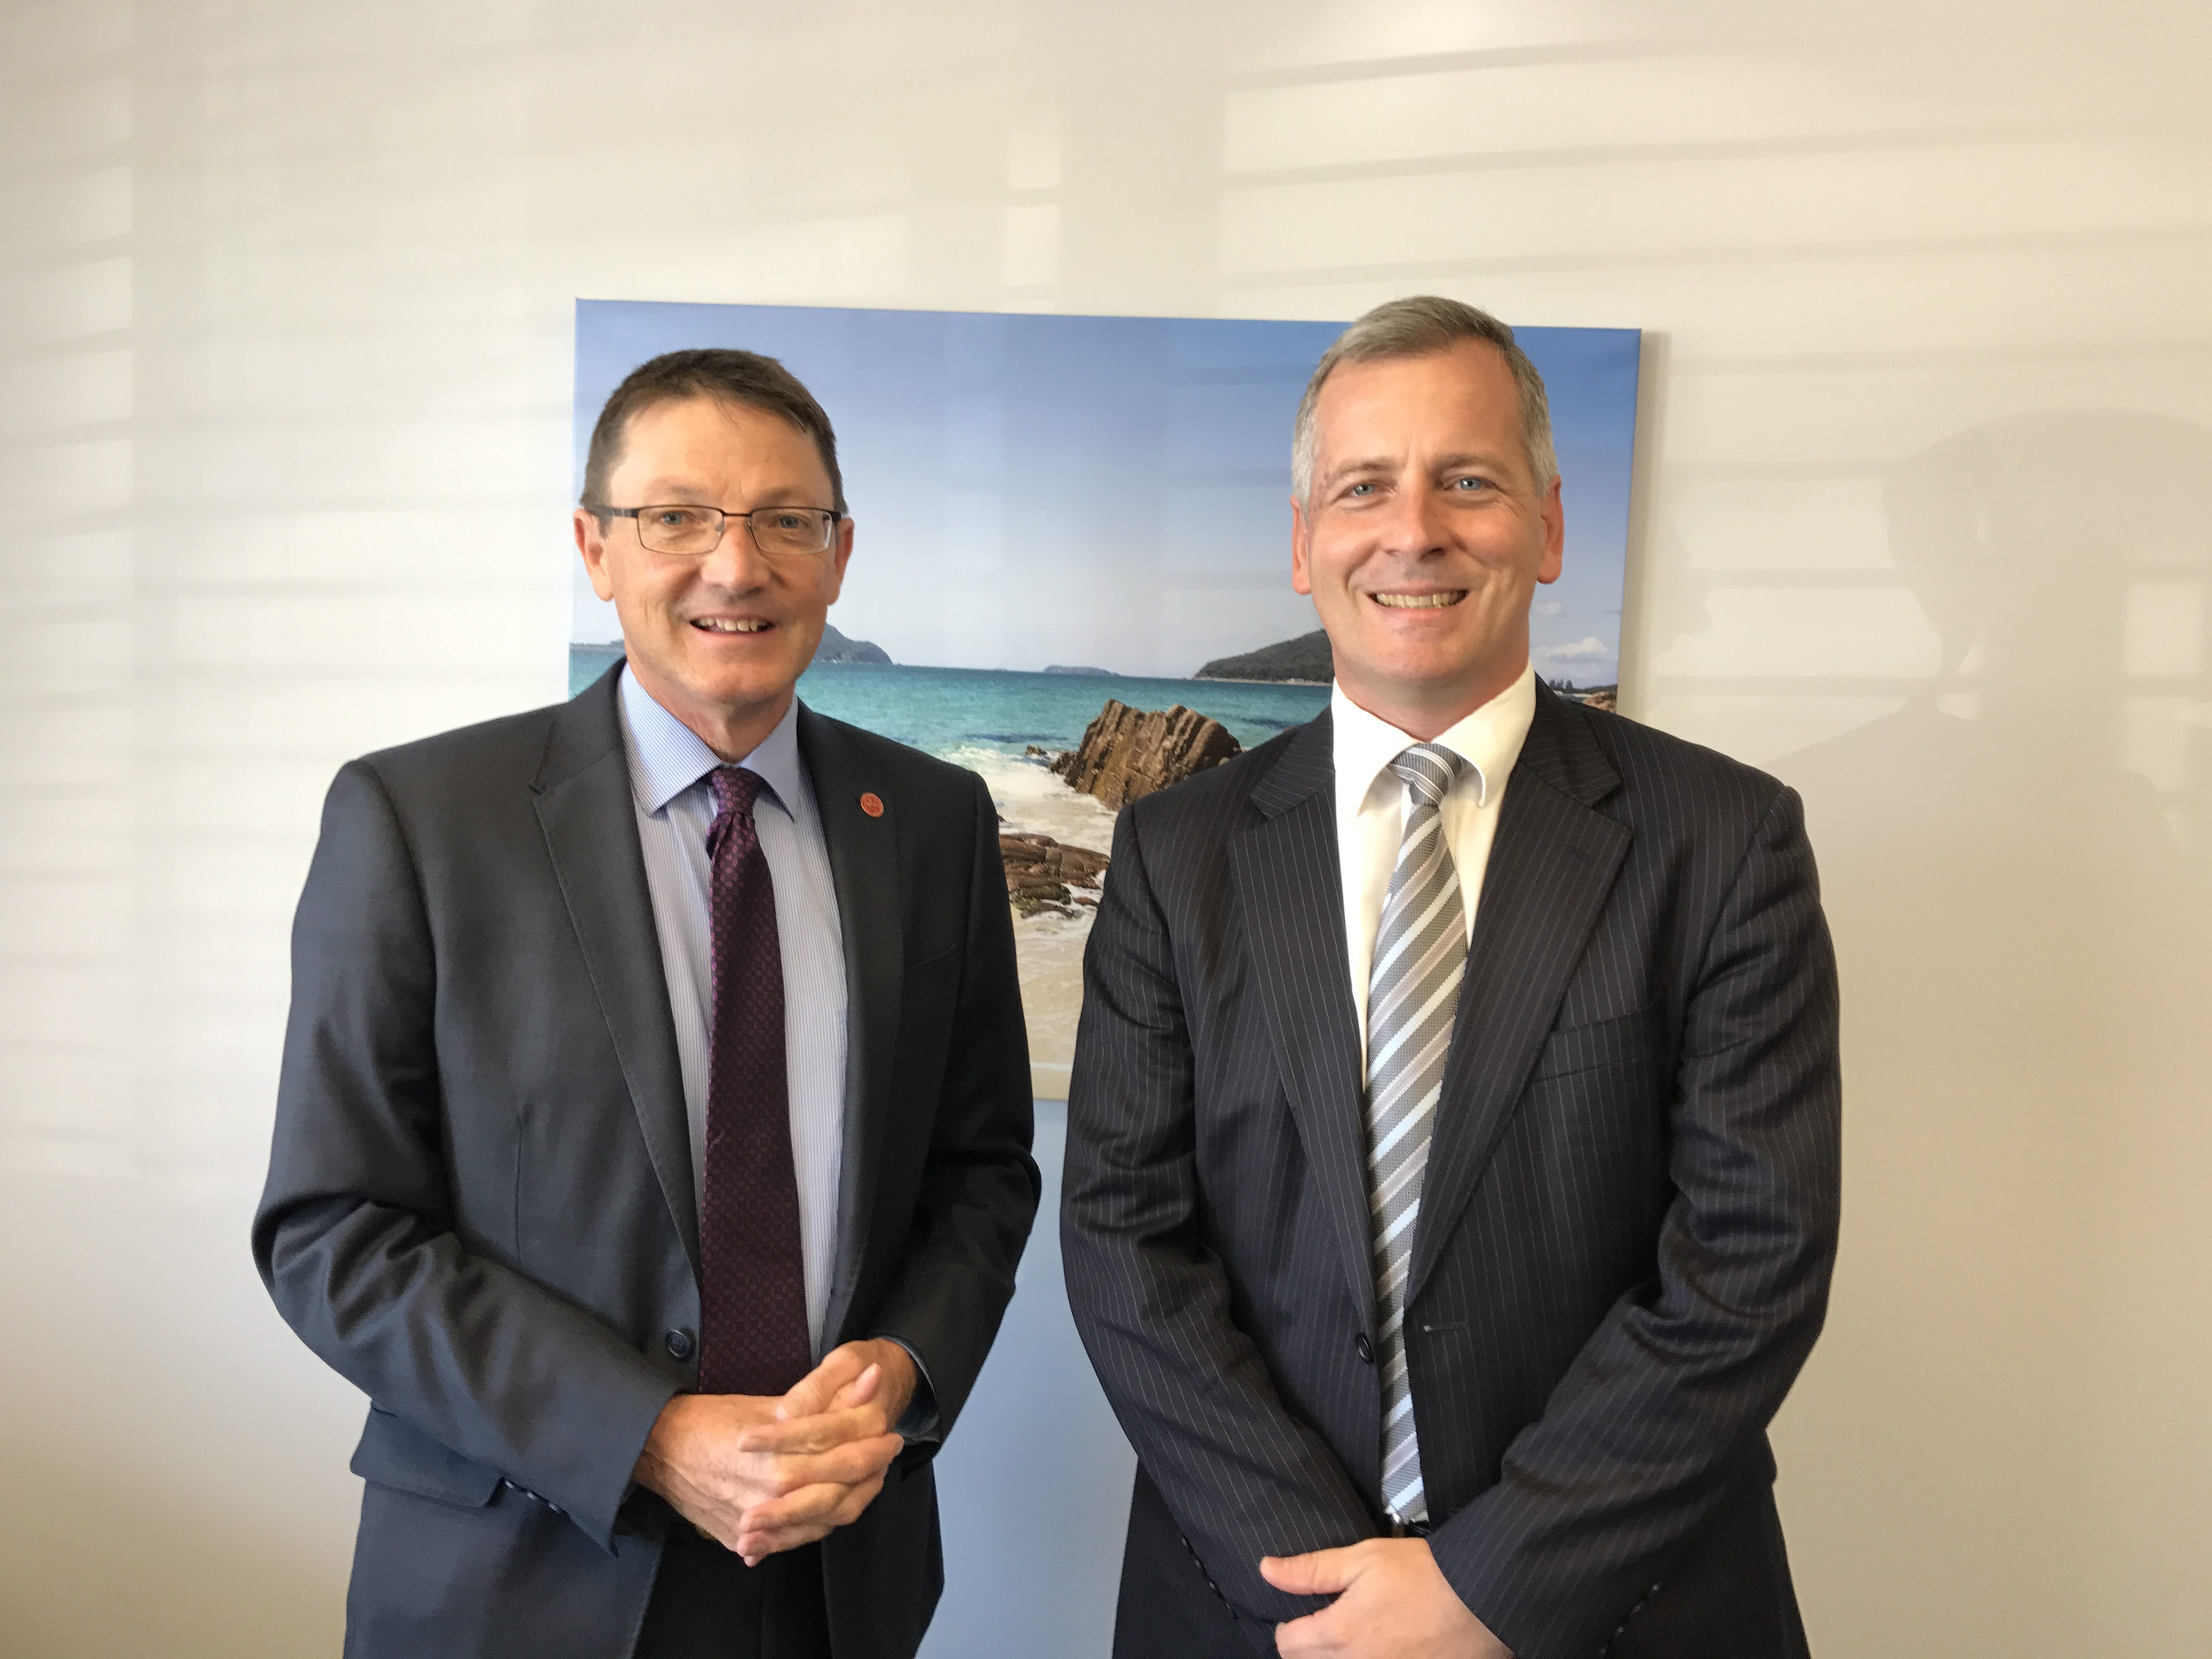 Parliamentary Secretary for the Hunter Scot MacDonald with Principal of St Philip’s Christian College Dr Timothy Petterson.